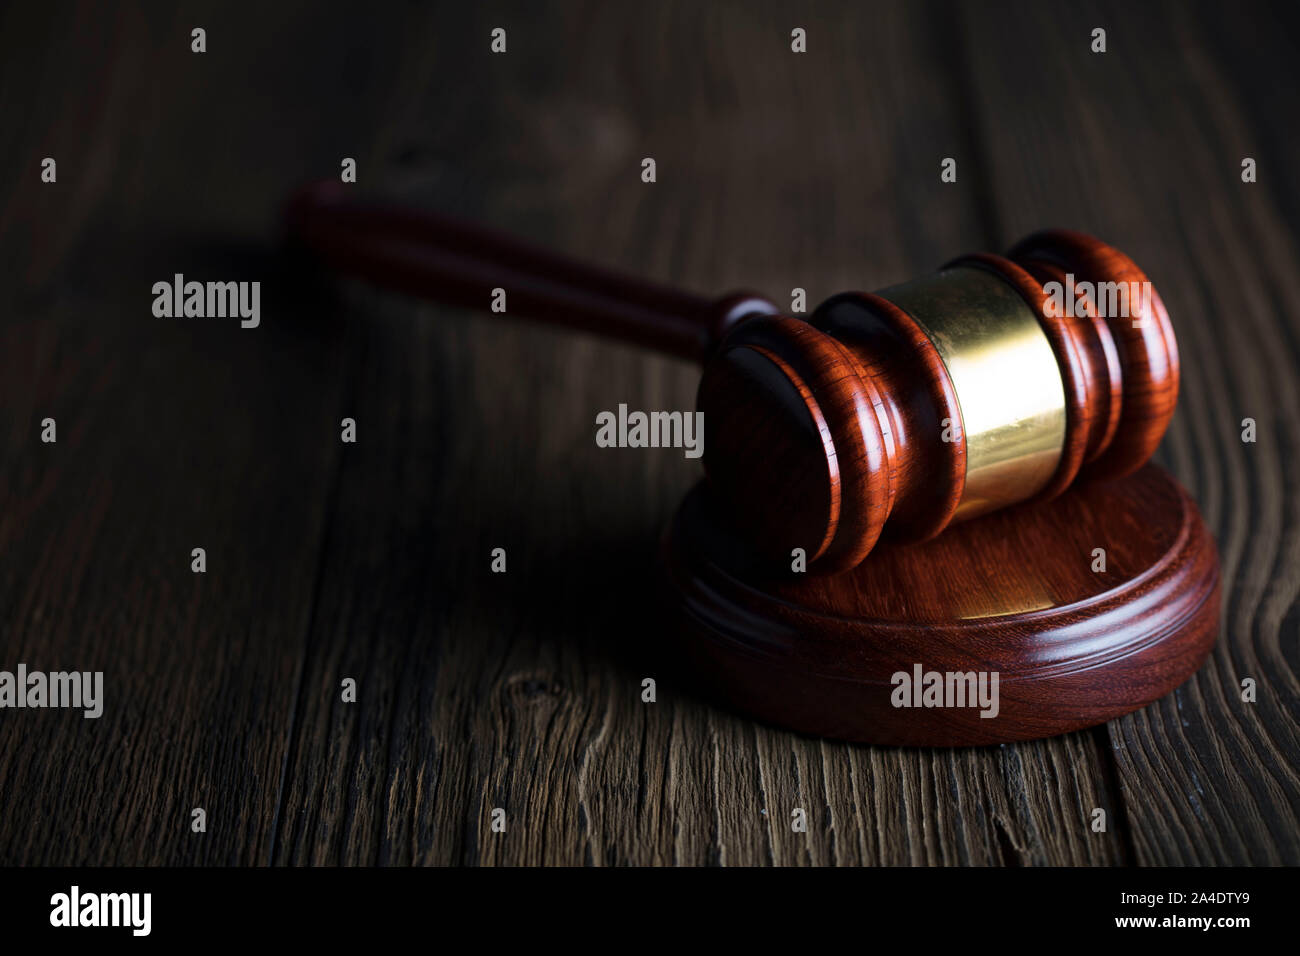 Antique gavel on the table. Law, auction and business concept. Place for logo or text. Stock Photo